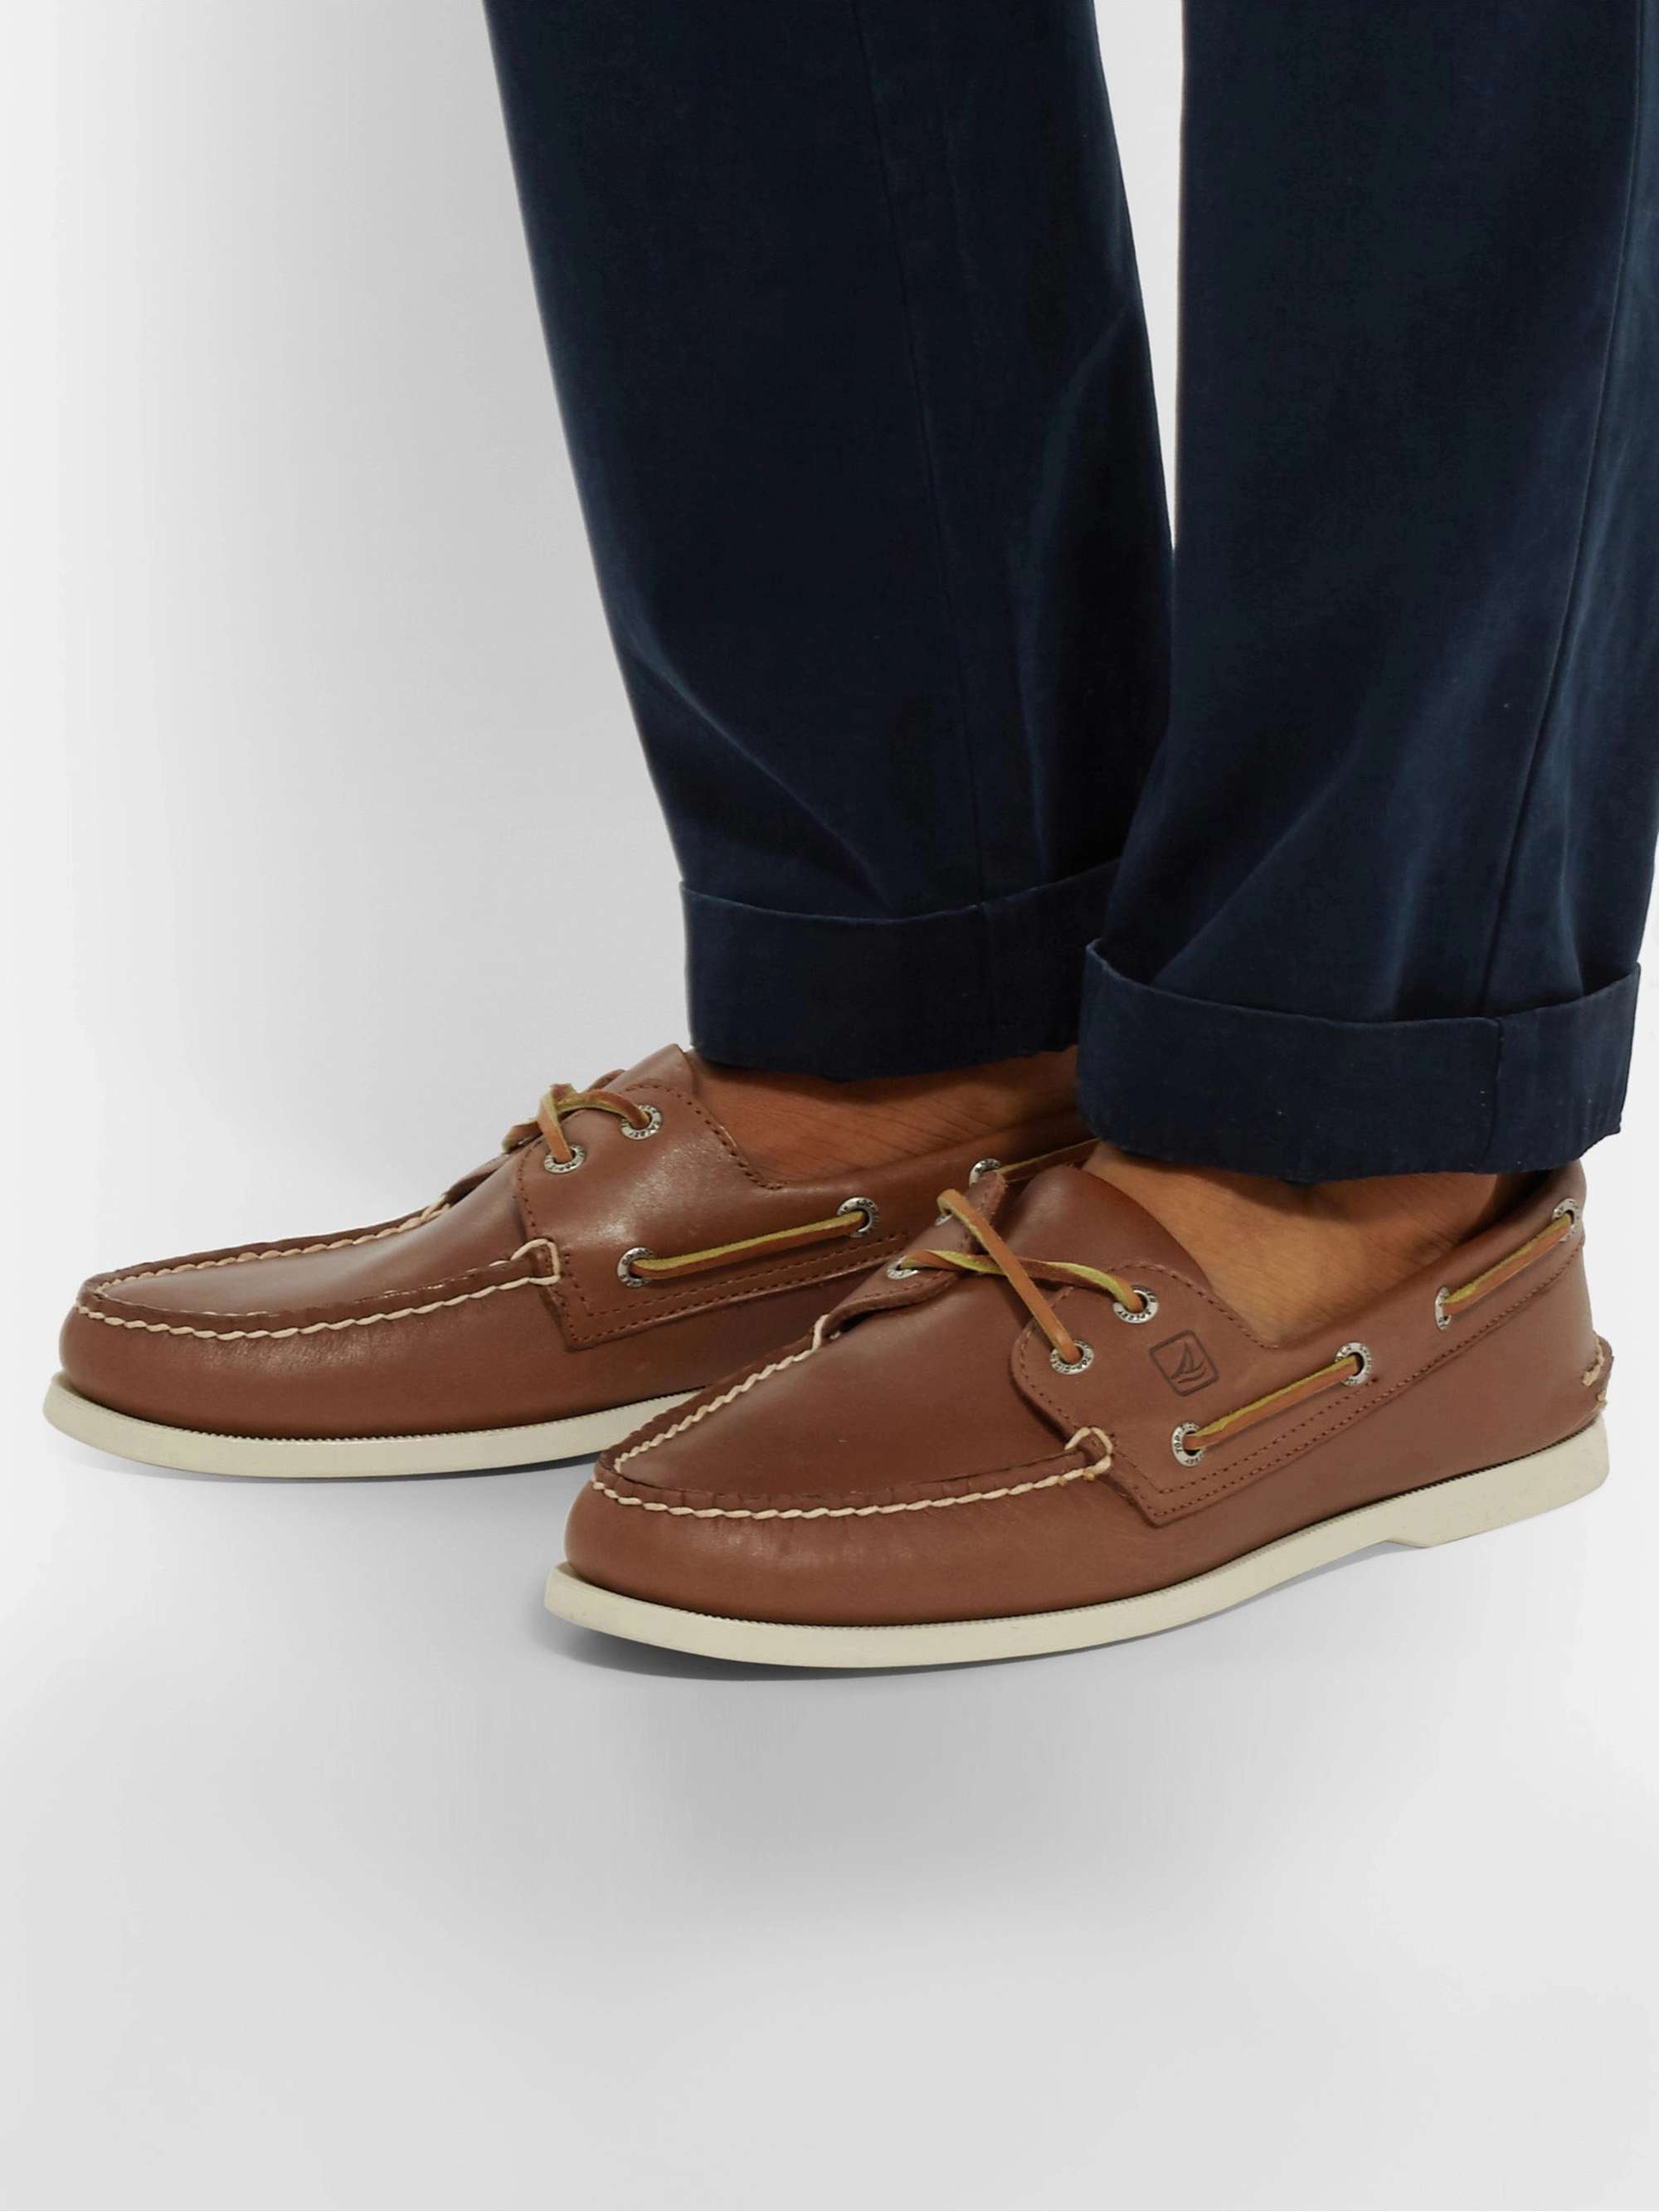 SPERRY Authentic Original Leather Boat Shoes | MR PORTER